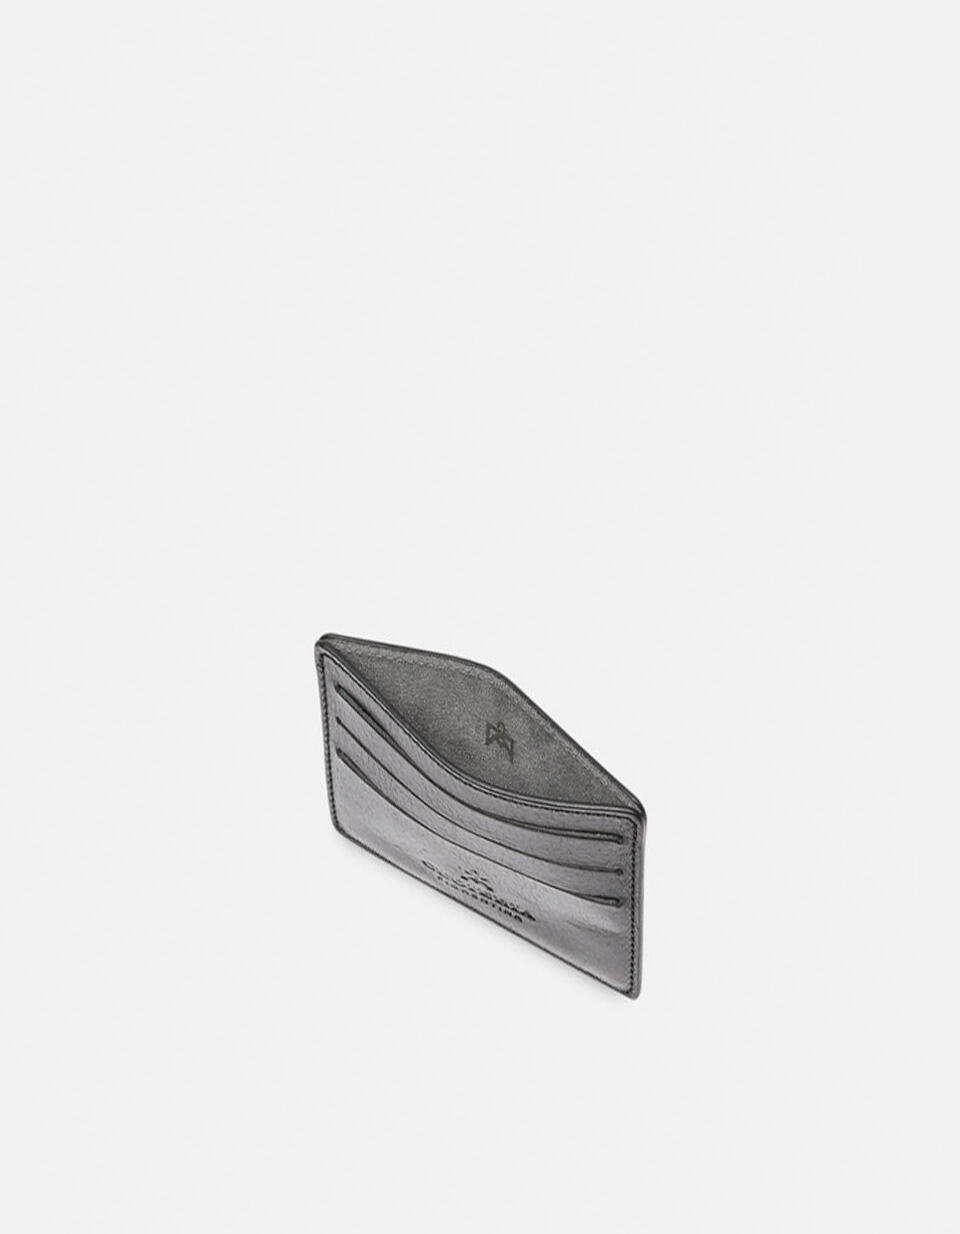 Card holder with banknote holder - Card Holders - Women's Wallets | Wallets NERO - Card Holders - Women's Wallets | WalletsCuoieria Fiorentina